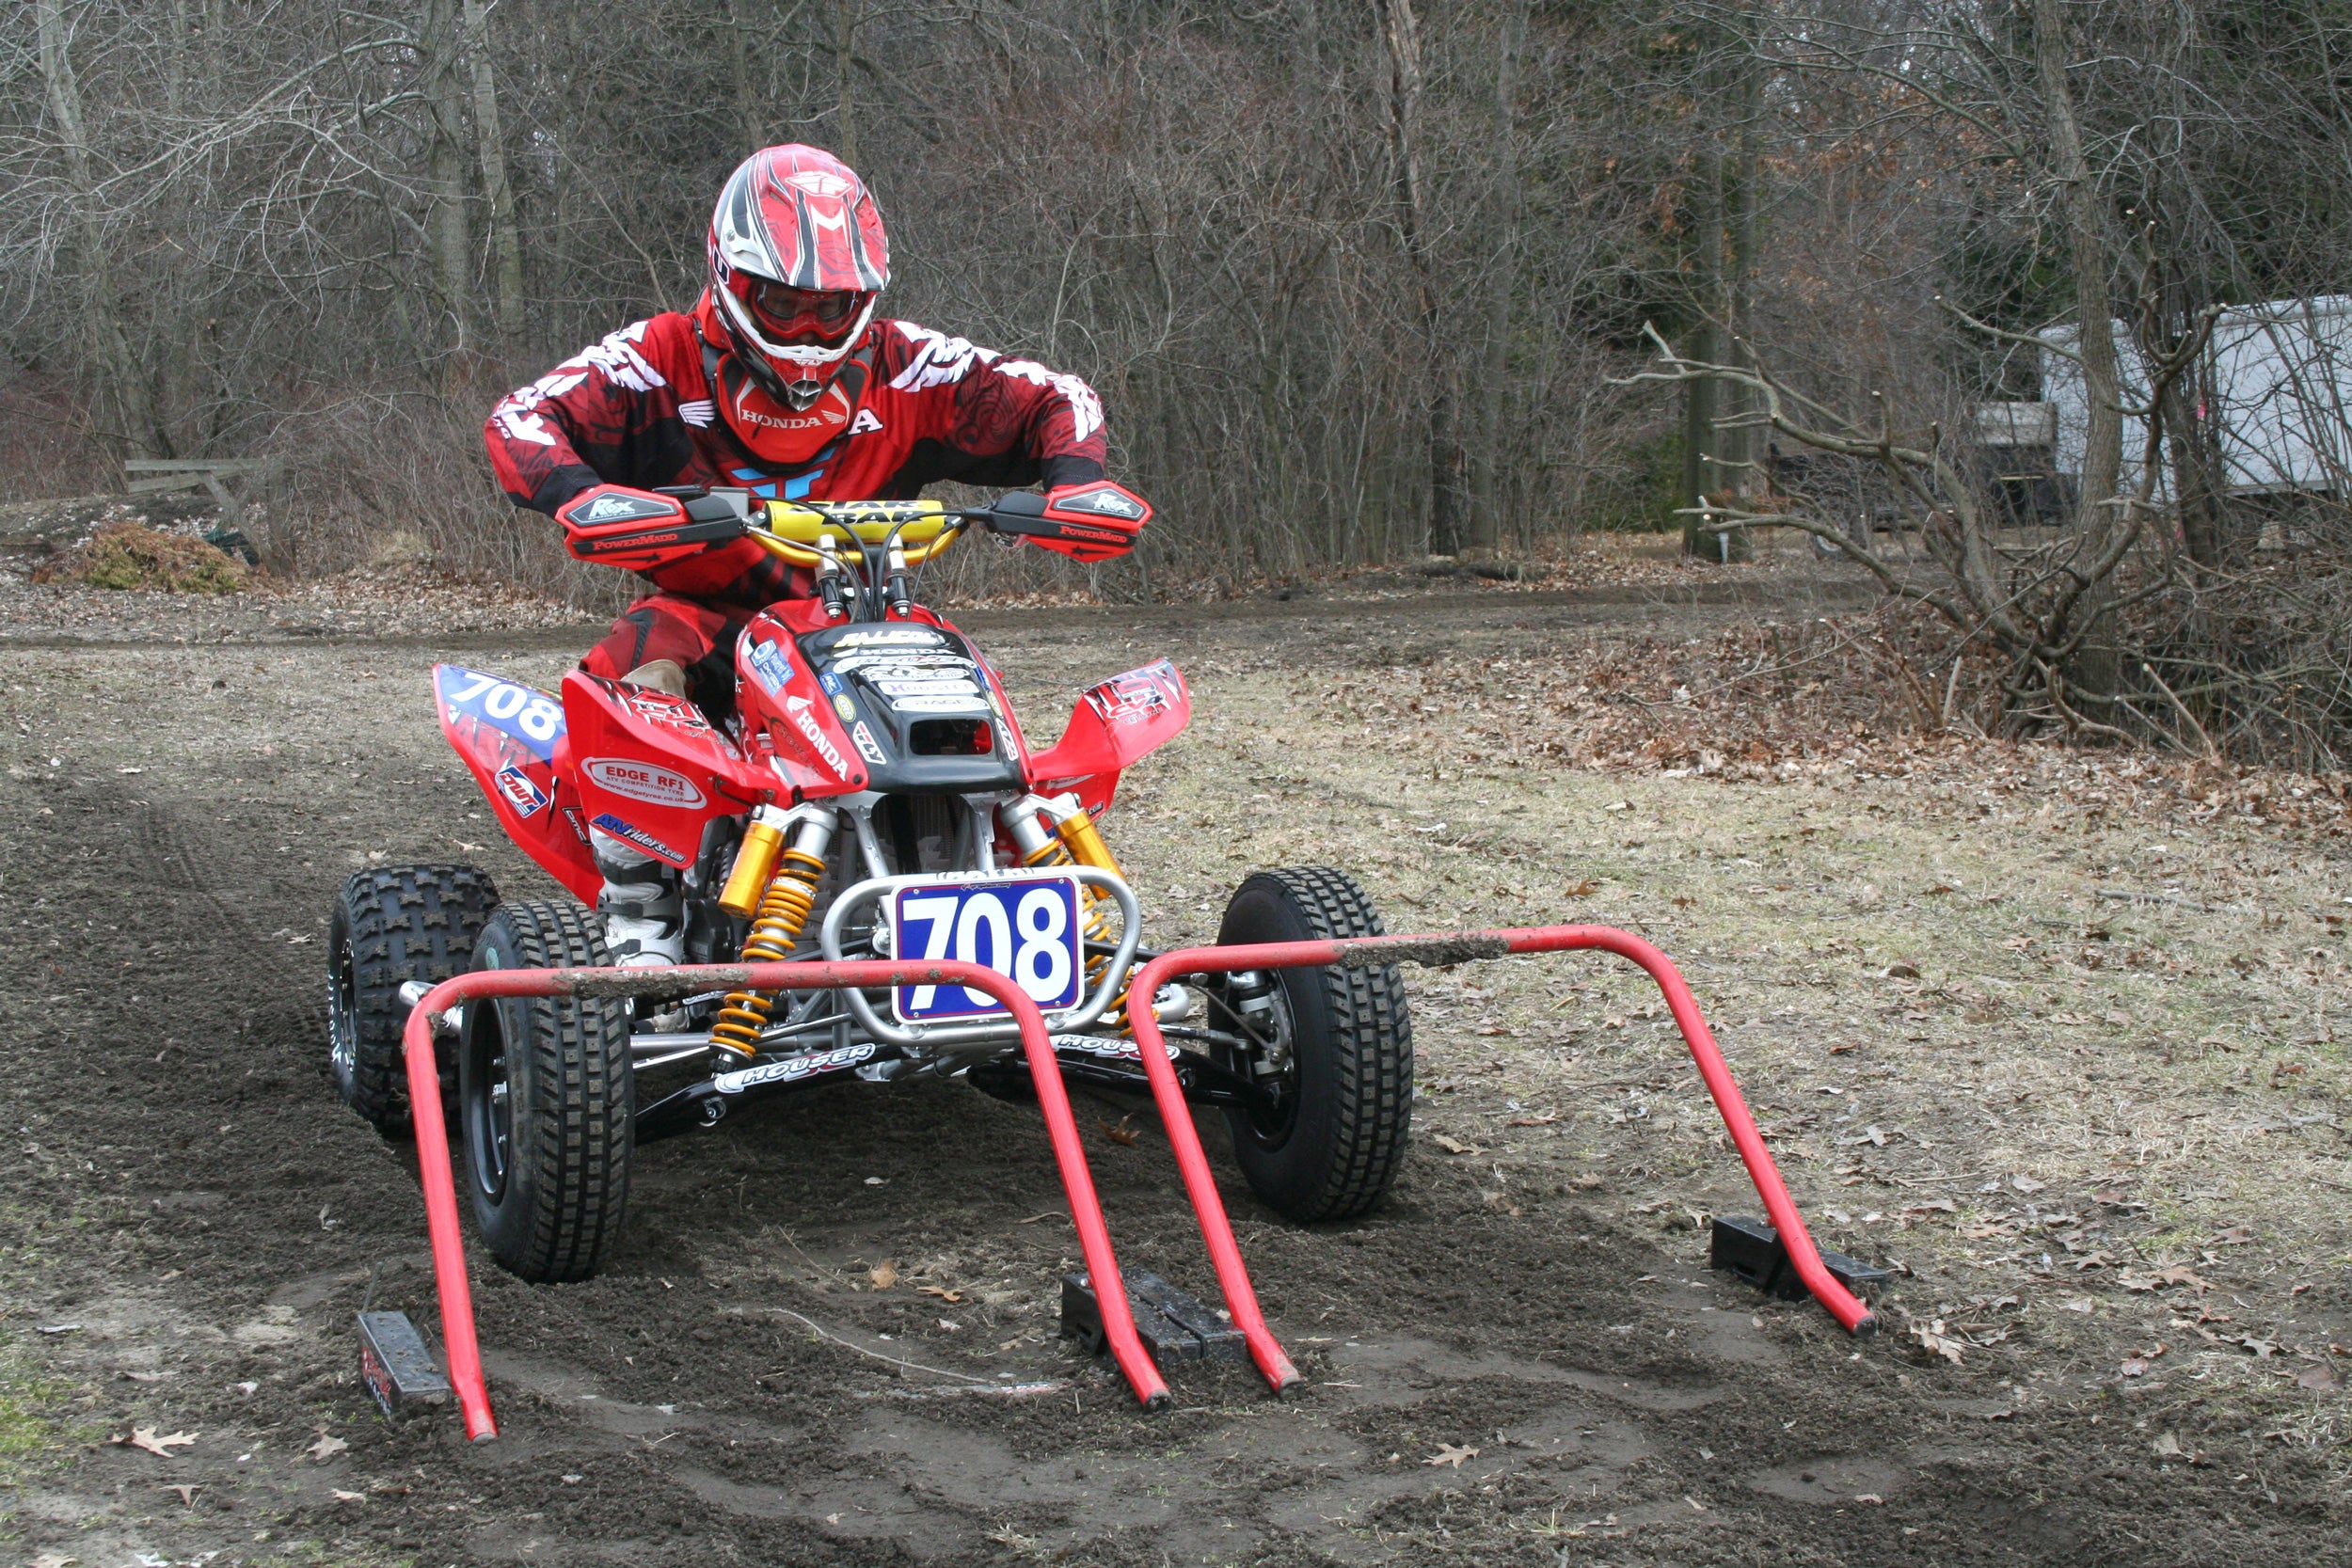 Red quad four wheeler lined up for a race start at two Risk Racing Holeshot race gates